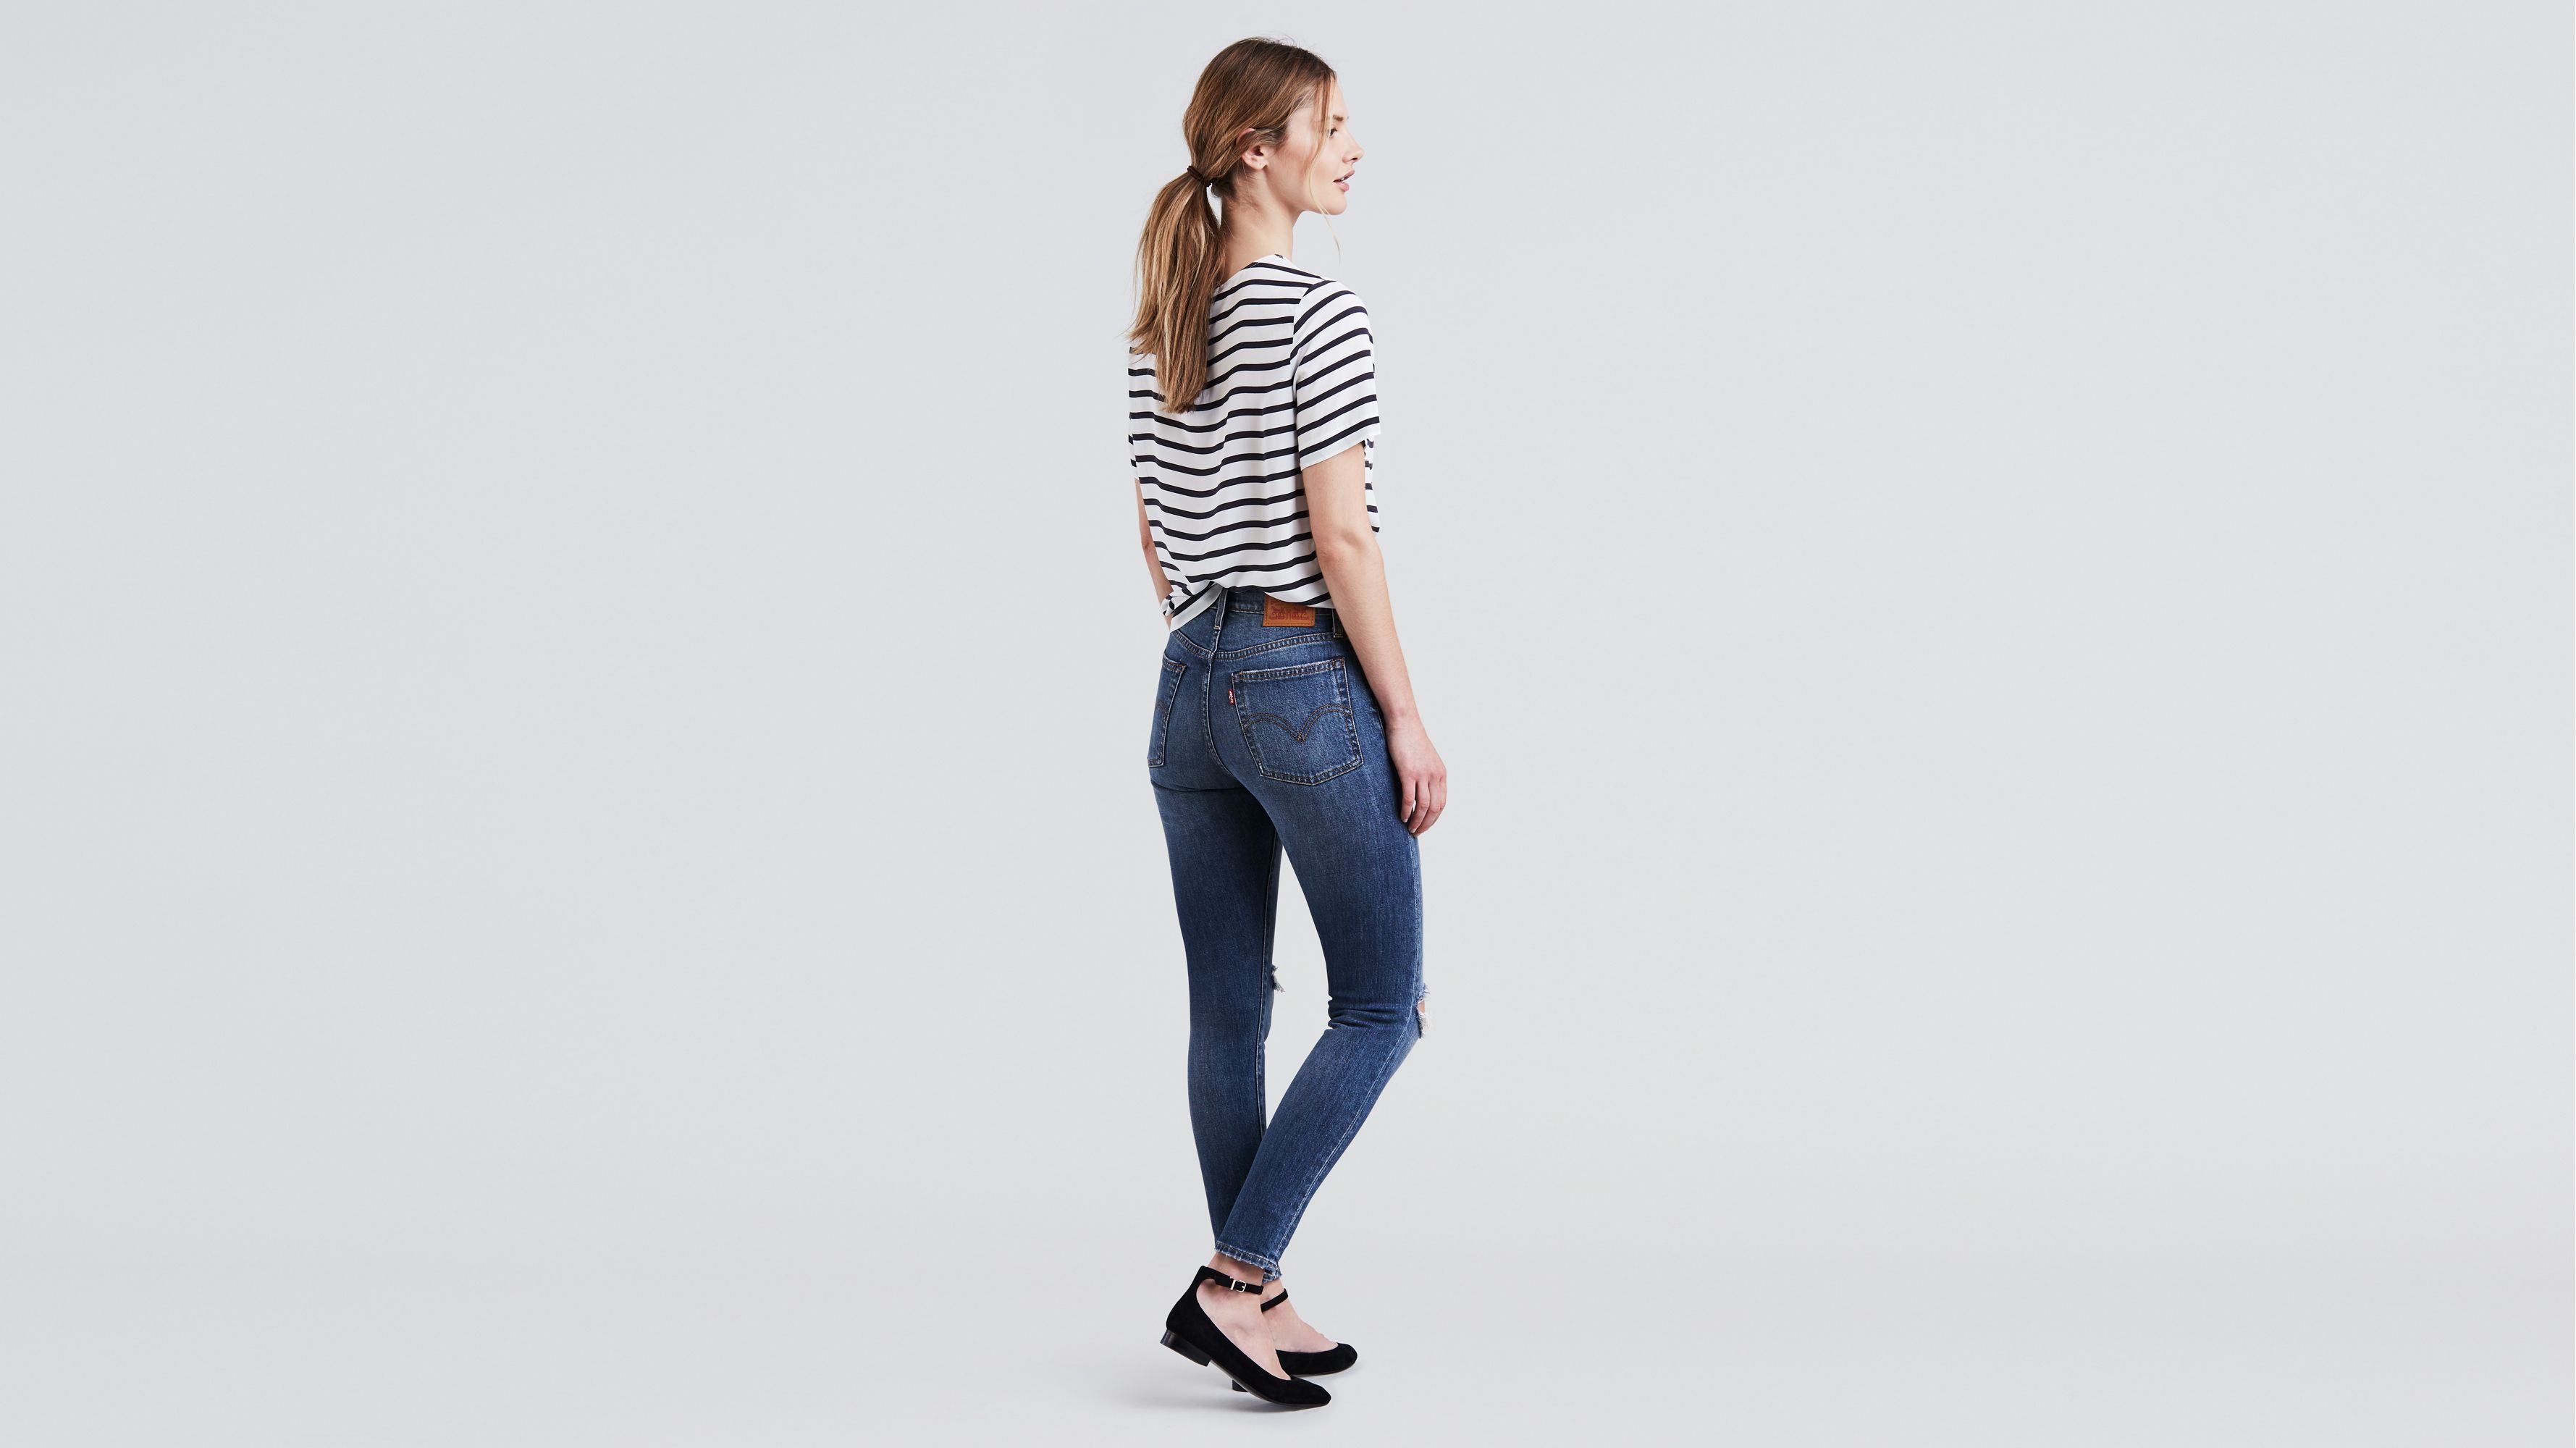 levis wedgie fit skinny jeans